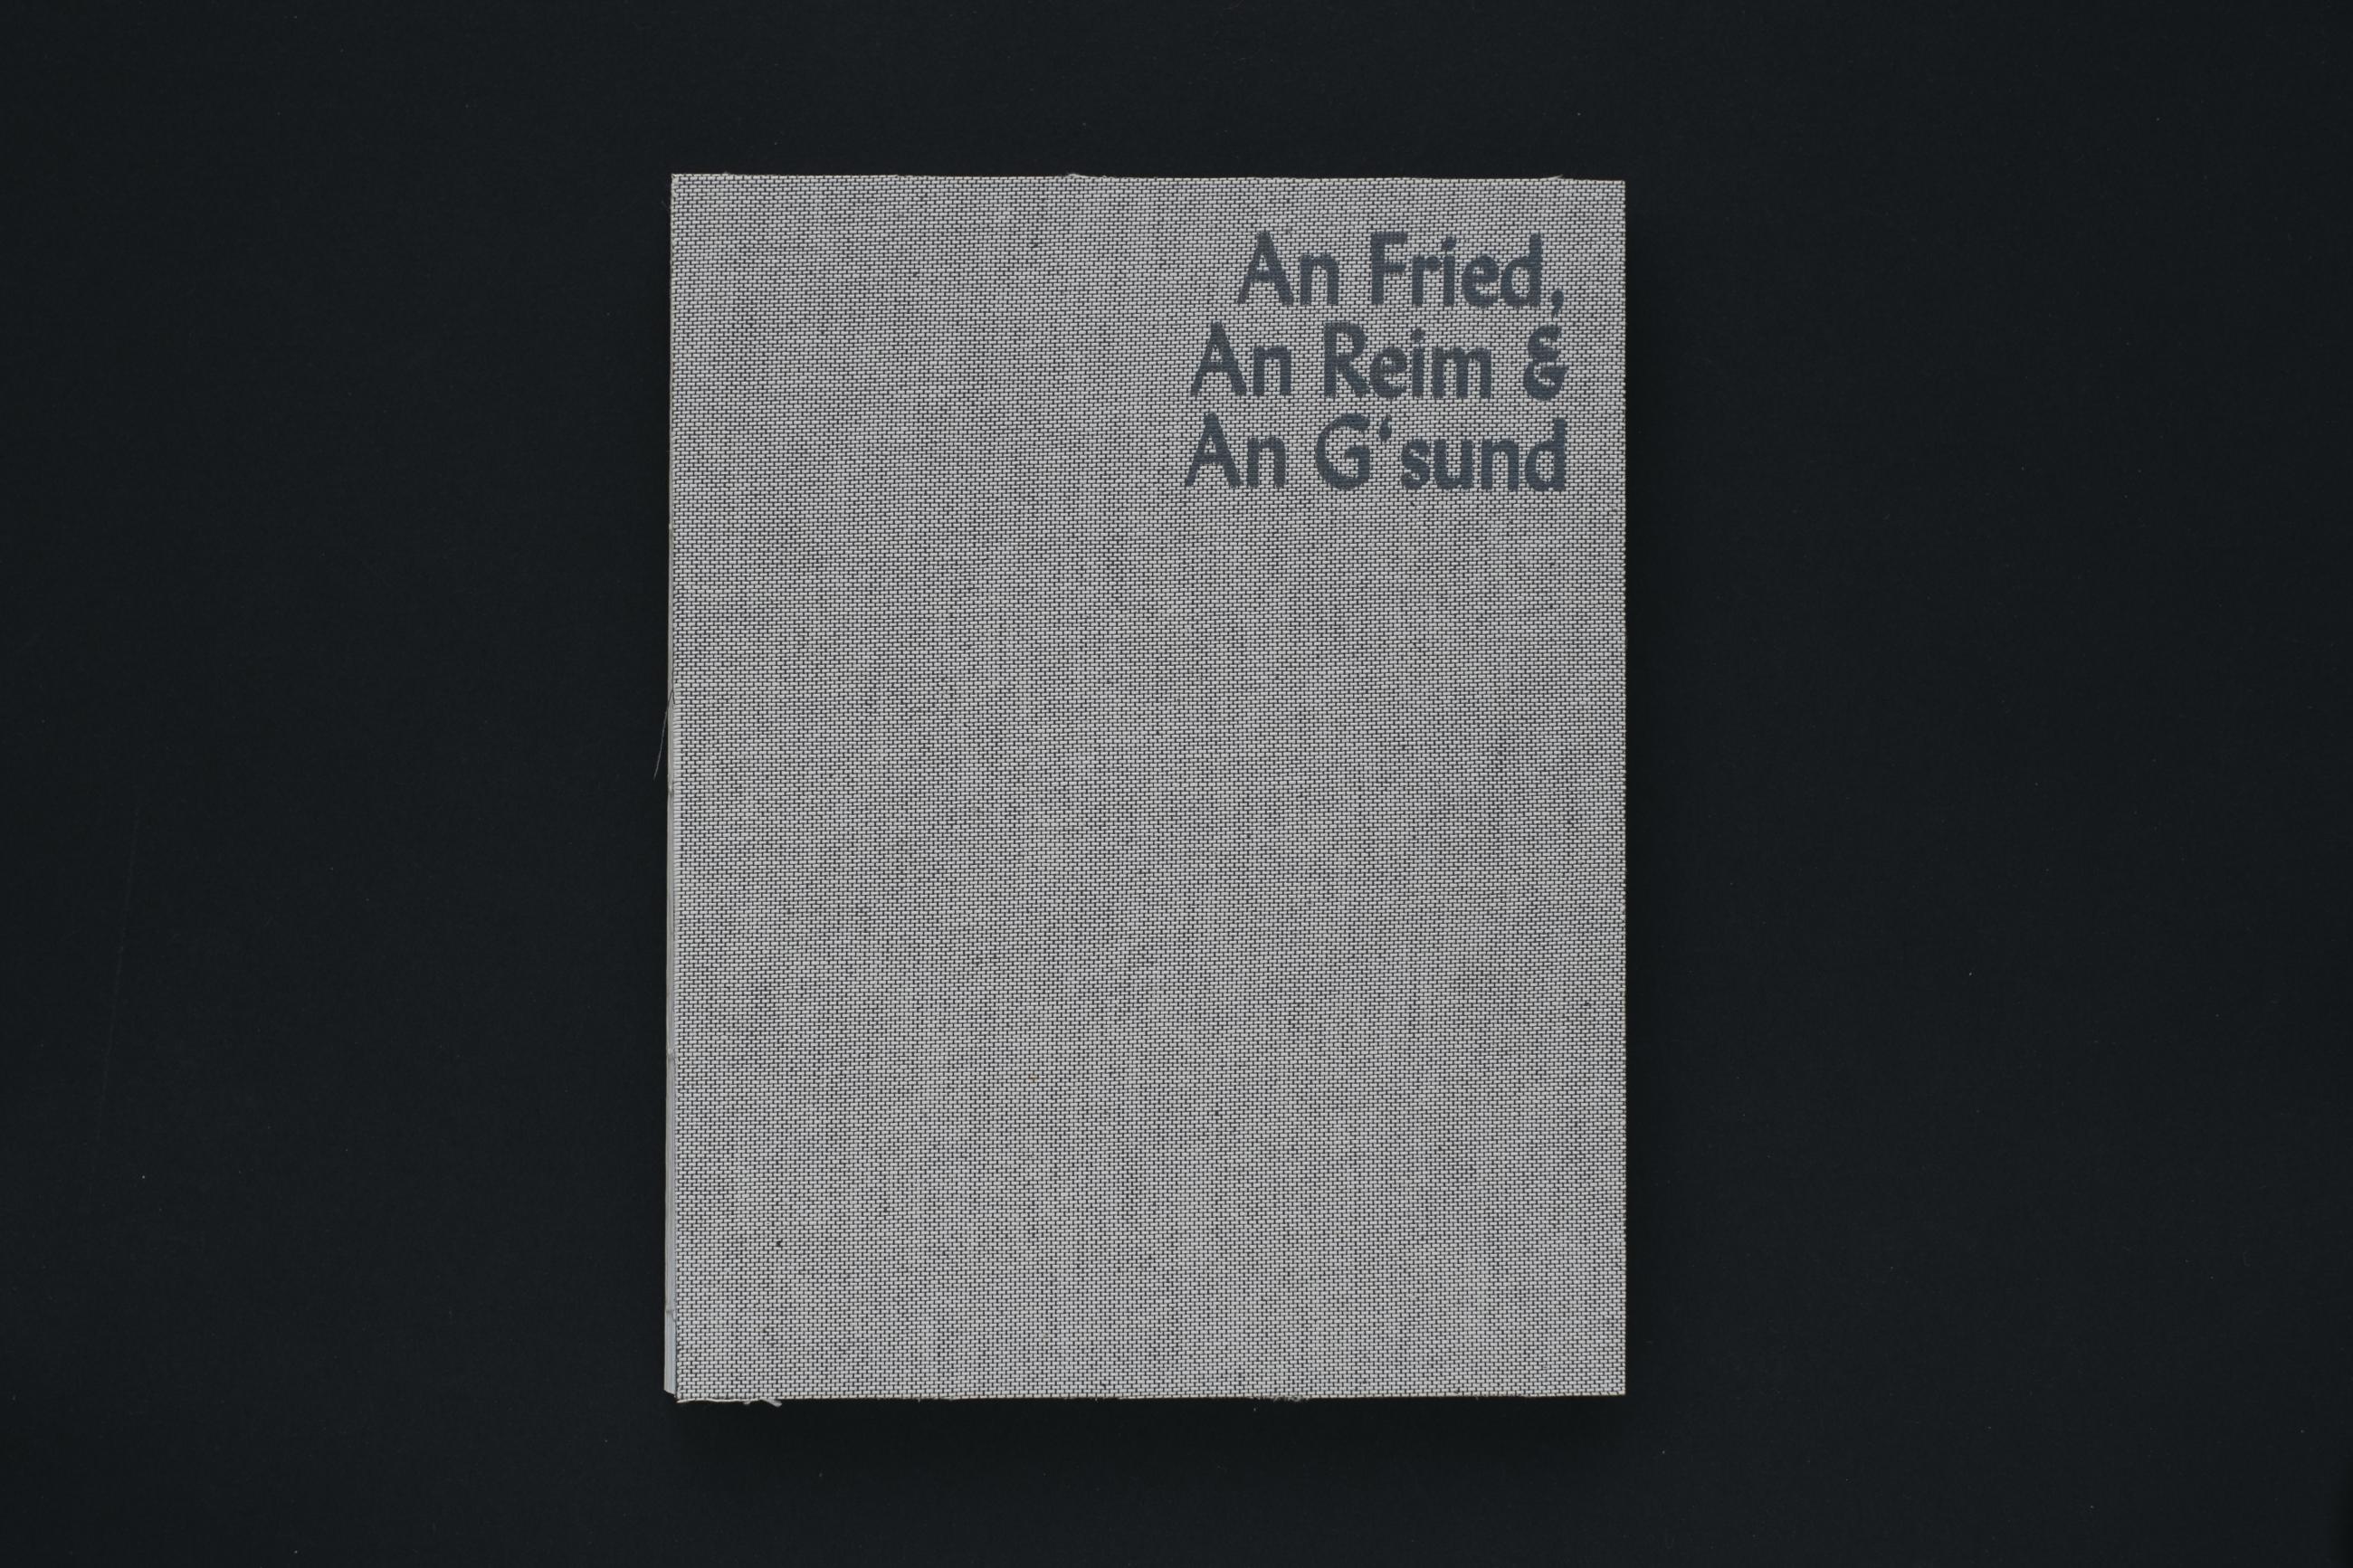 Cover of the Book "An Fried, an Reim & an G'sund" by Anna Roters